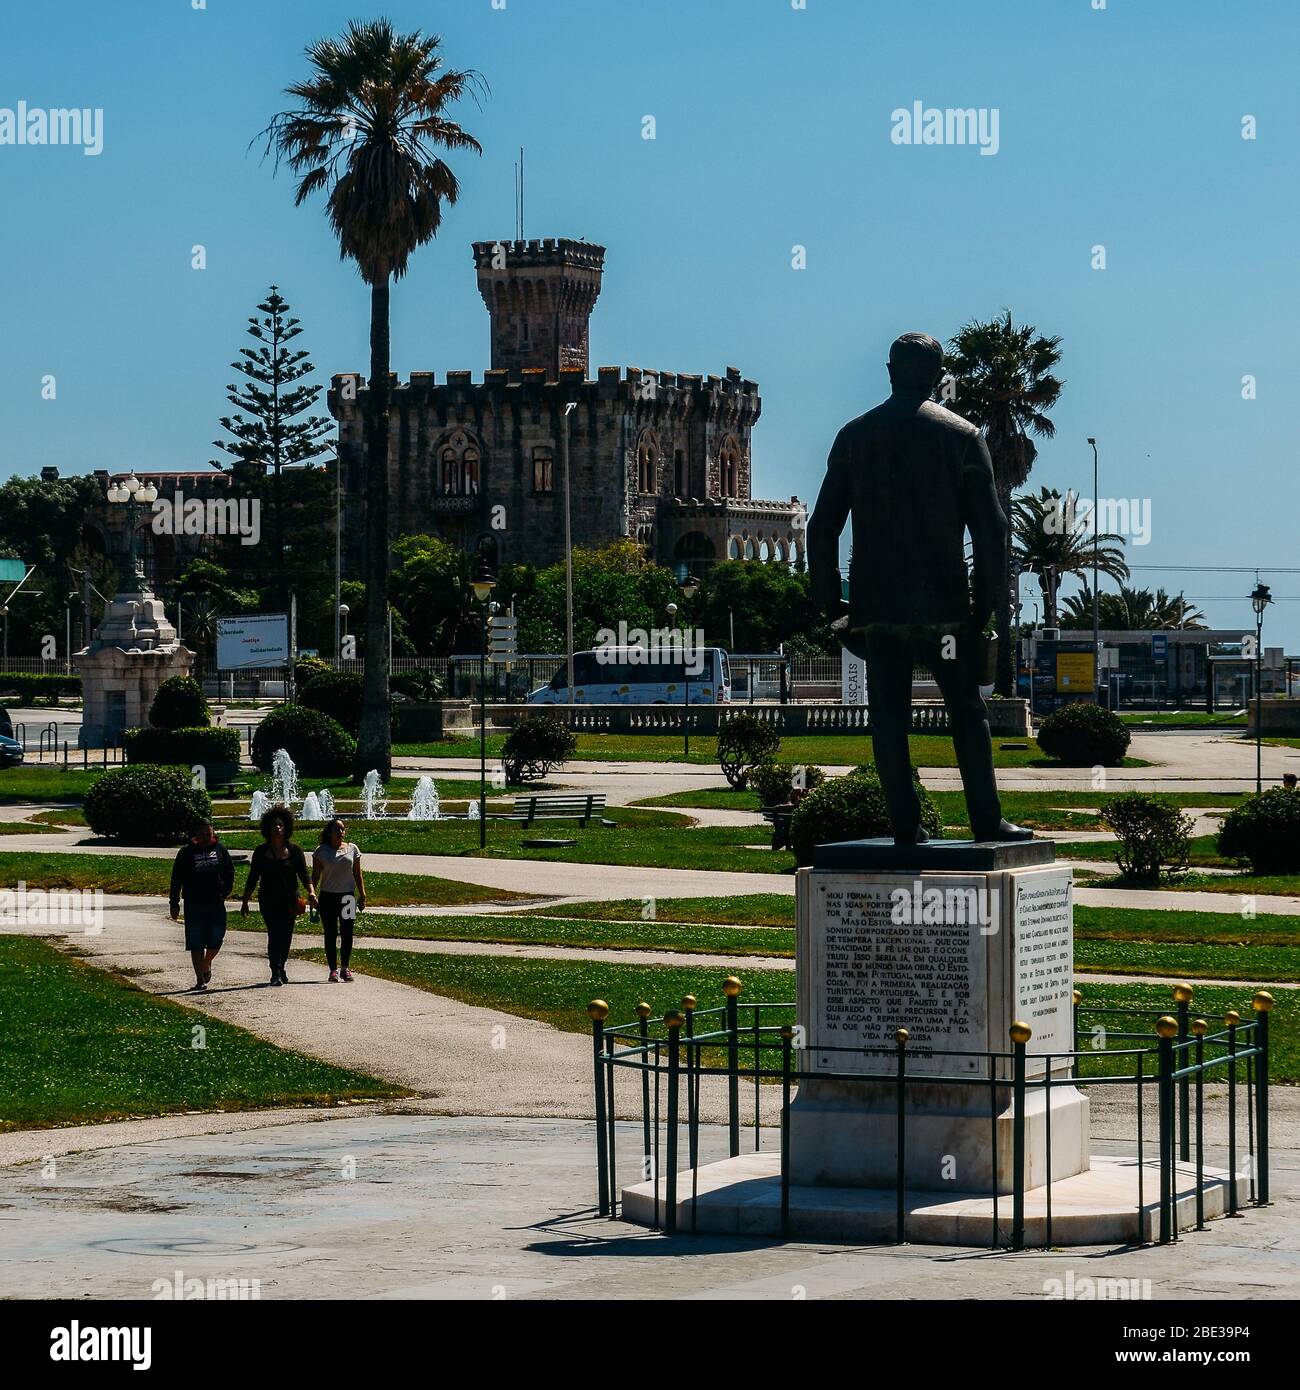 Estoril, Portugal - April 11, 2020: Statue of Fausto Cardoso and Baronial Estoril Castle in background overlooking the ocean Stock Photo